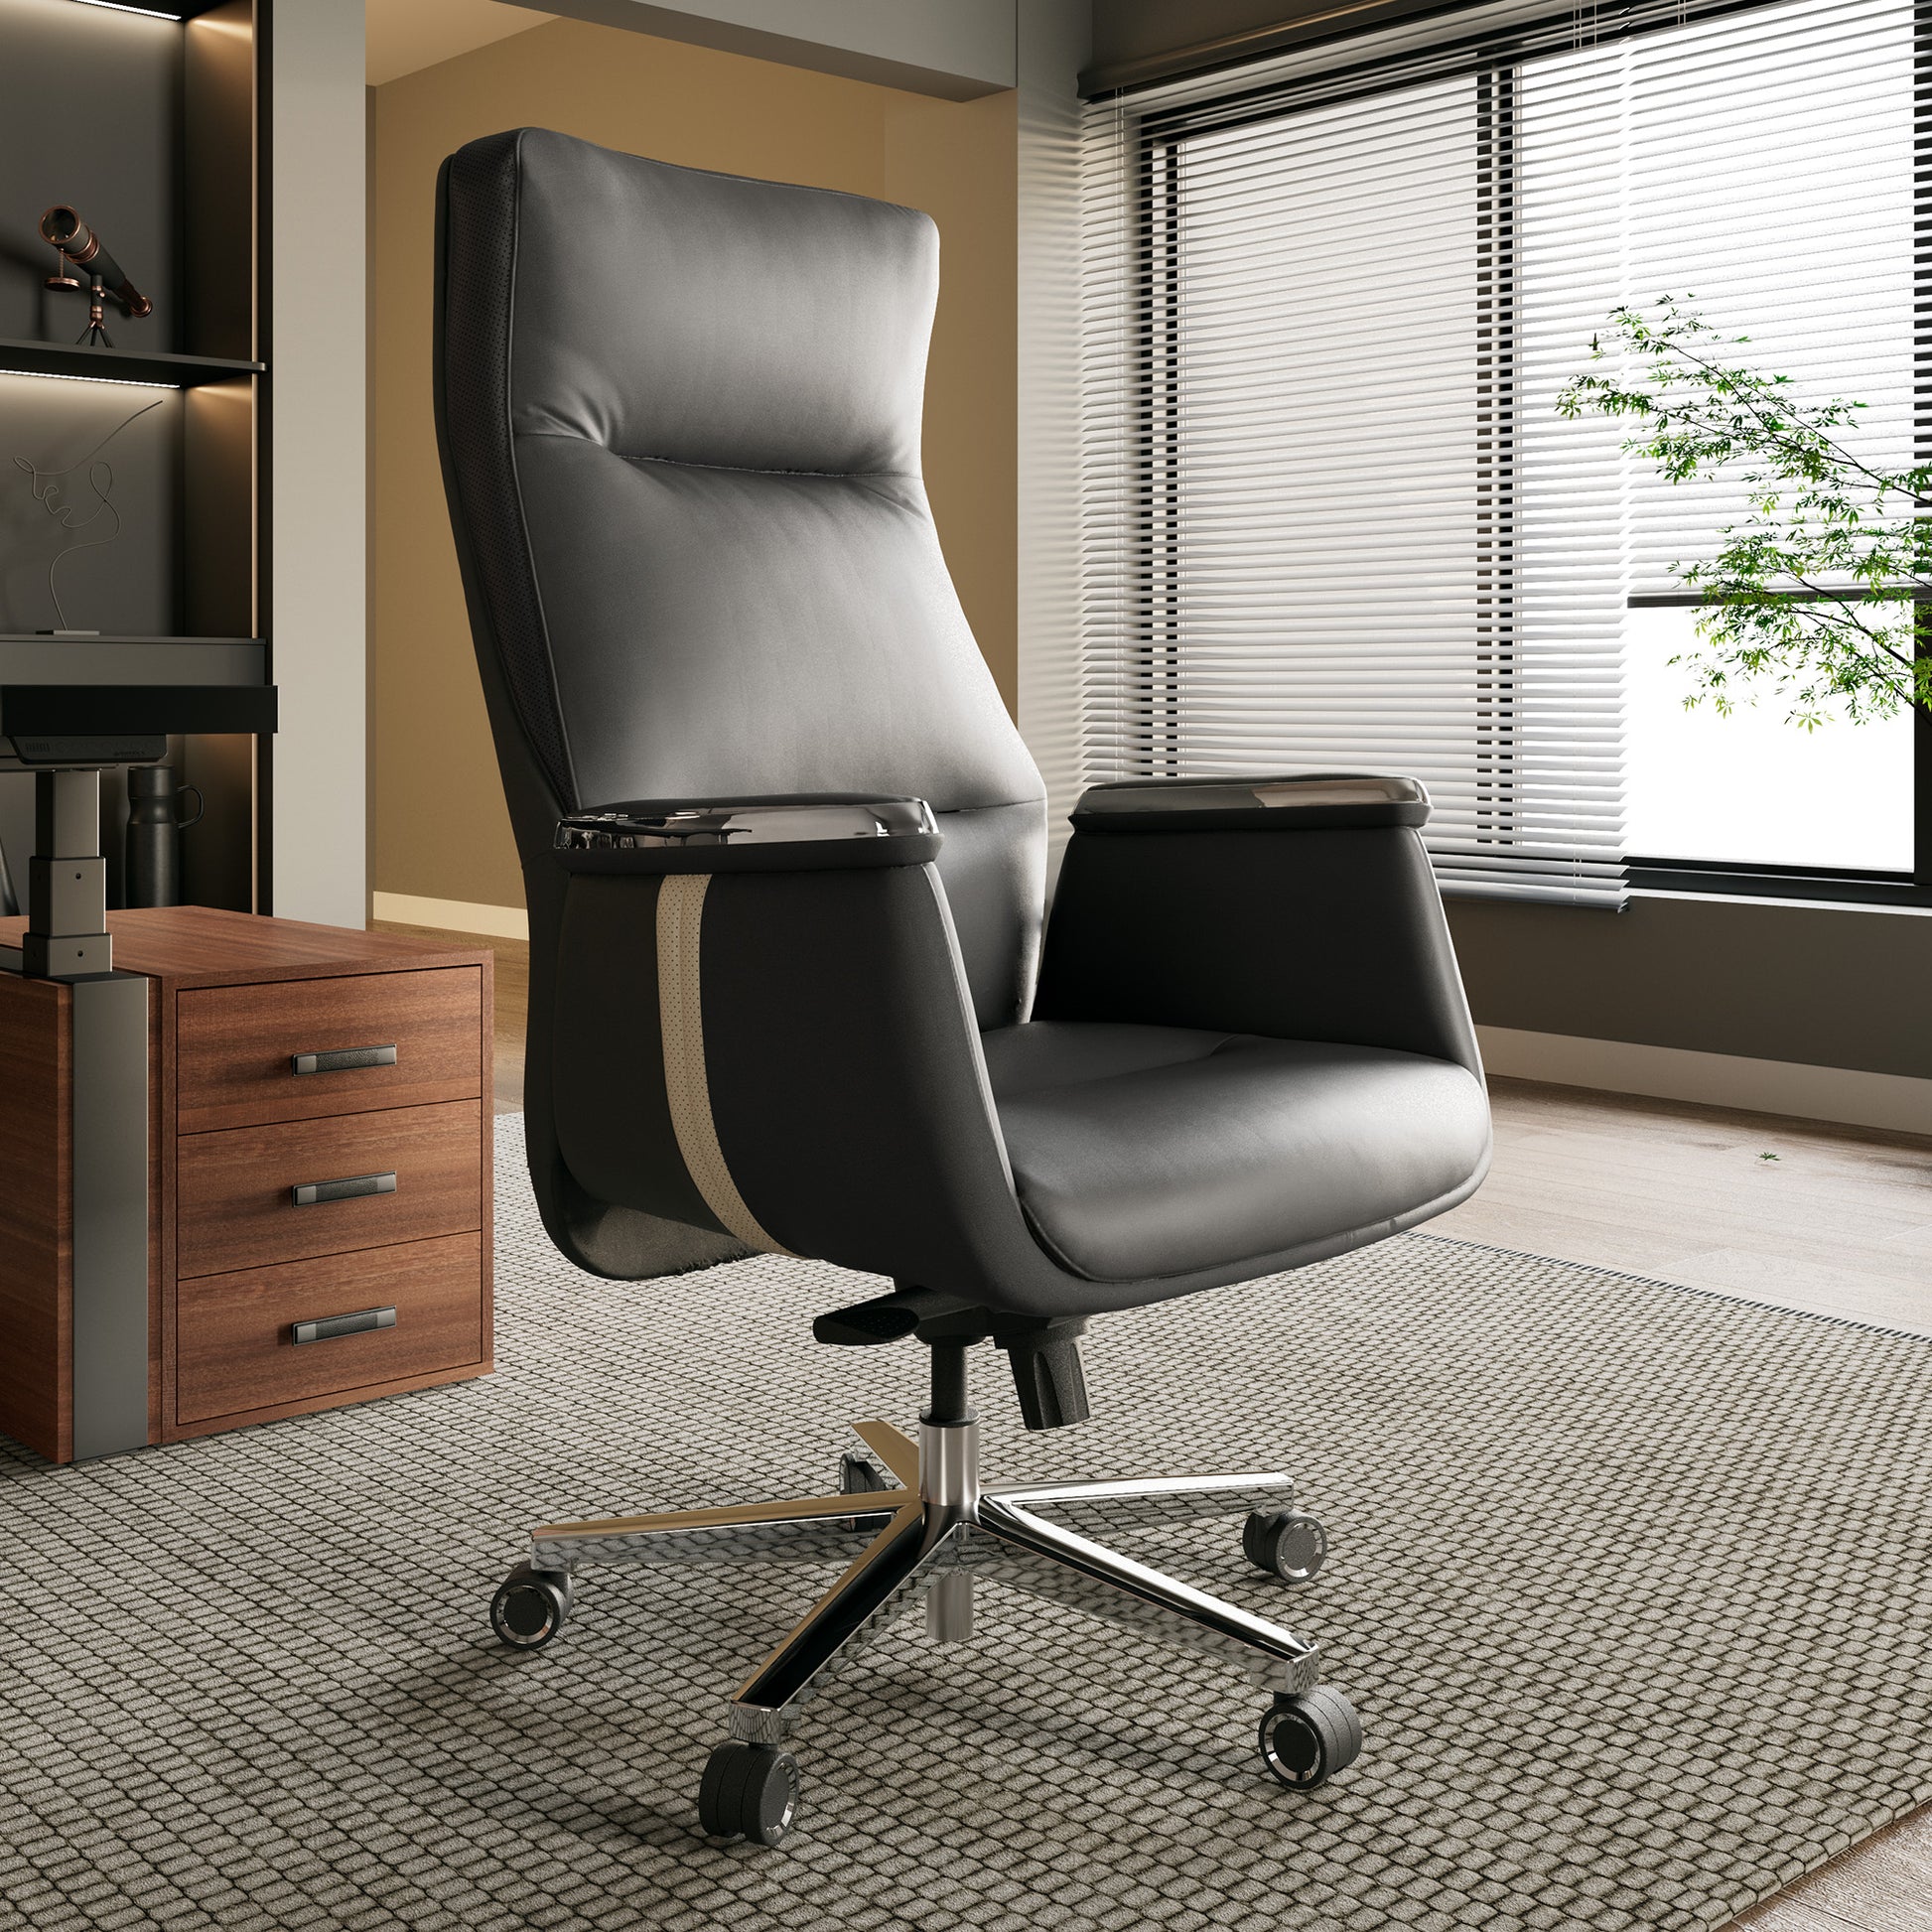 Eureka comfy leather executive office chair with high back and lumbar support,Iron Gray